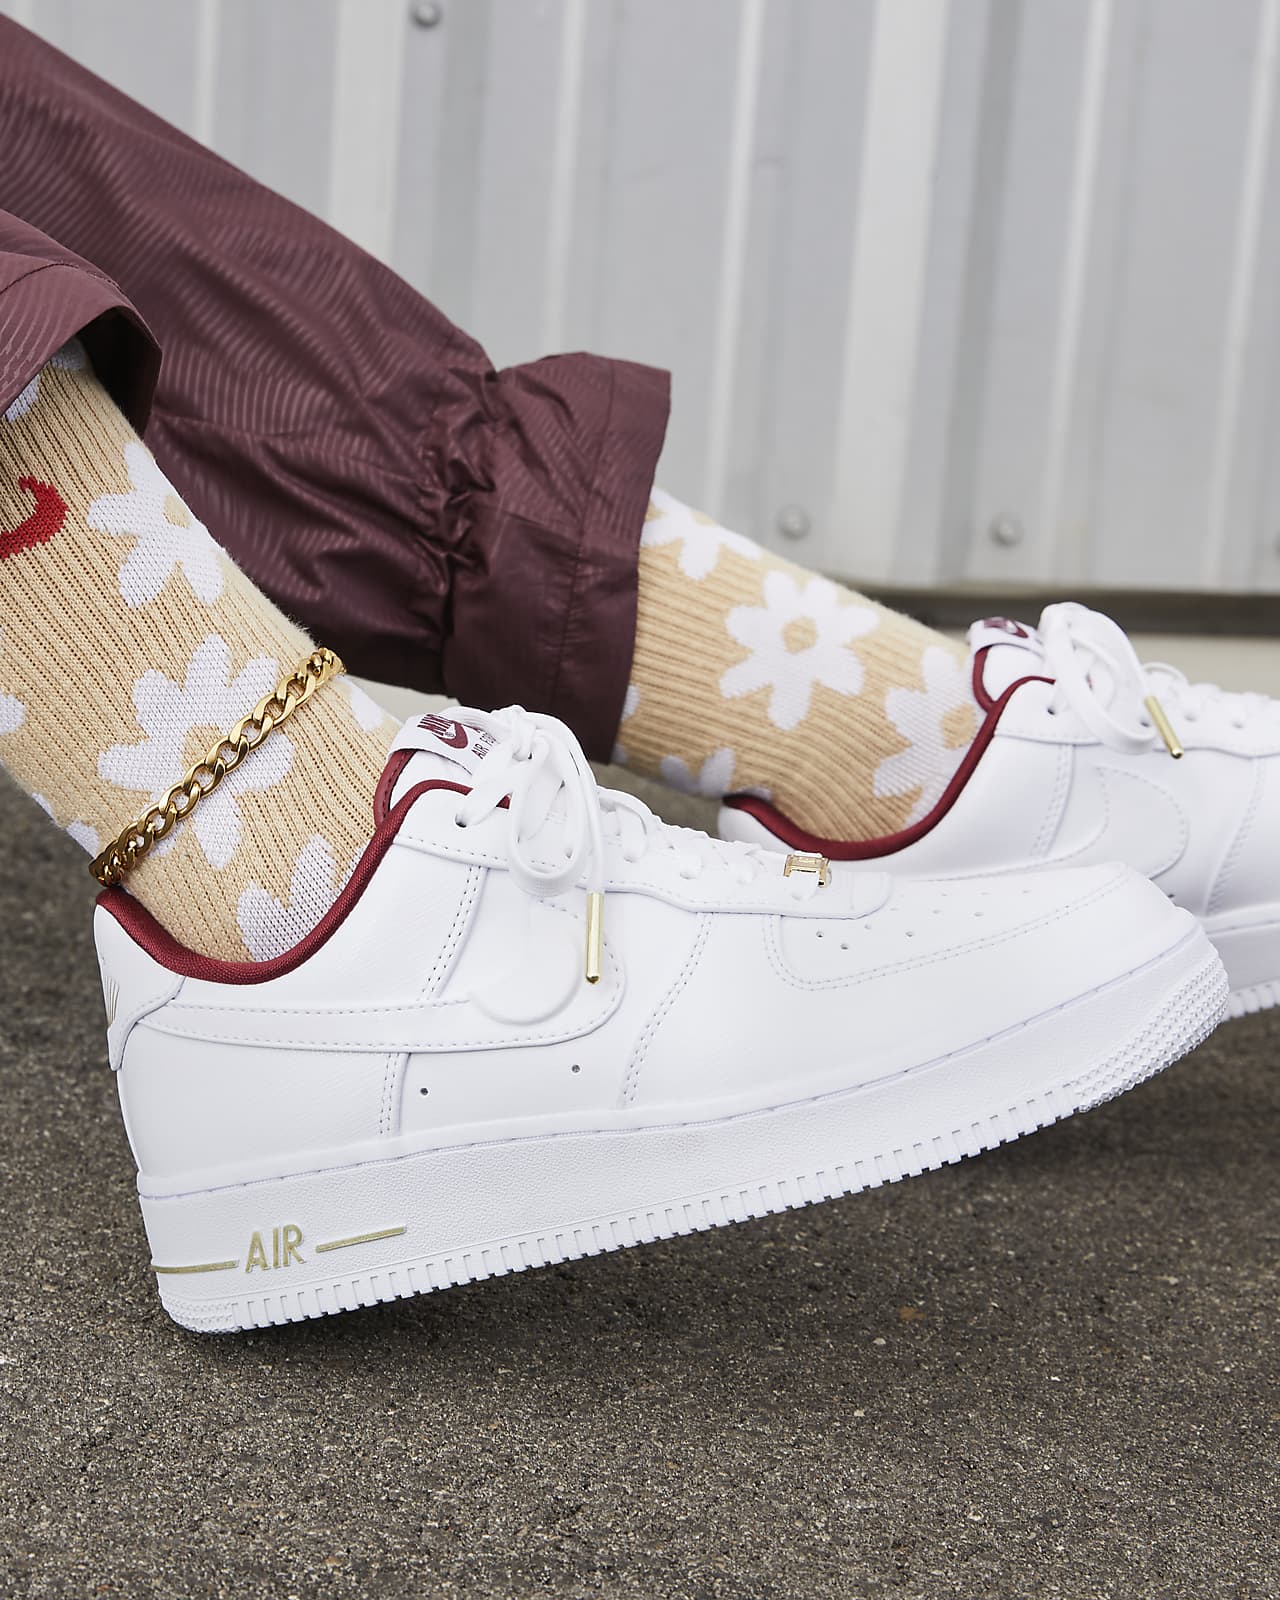 nike women's air force 1 07 shoes